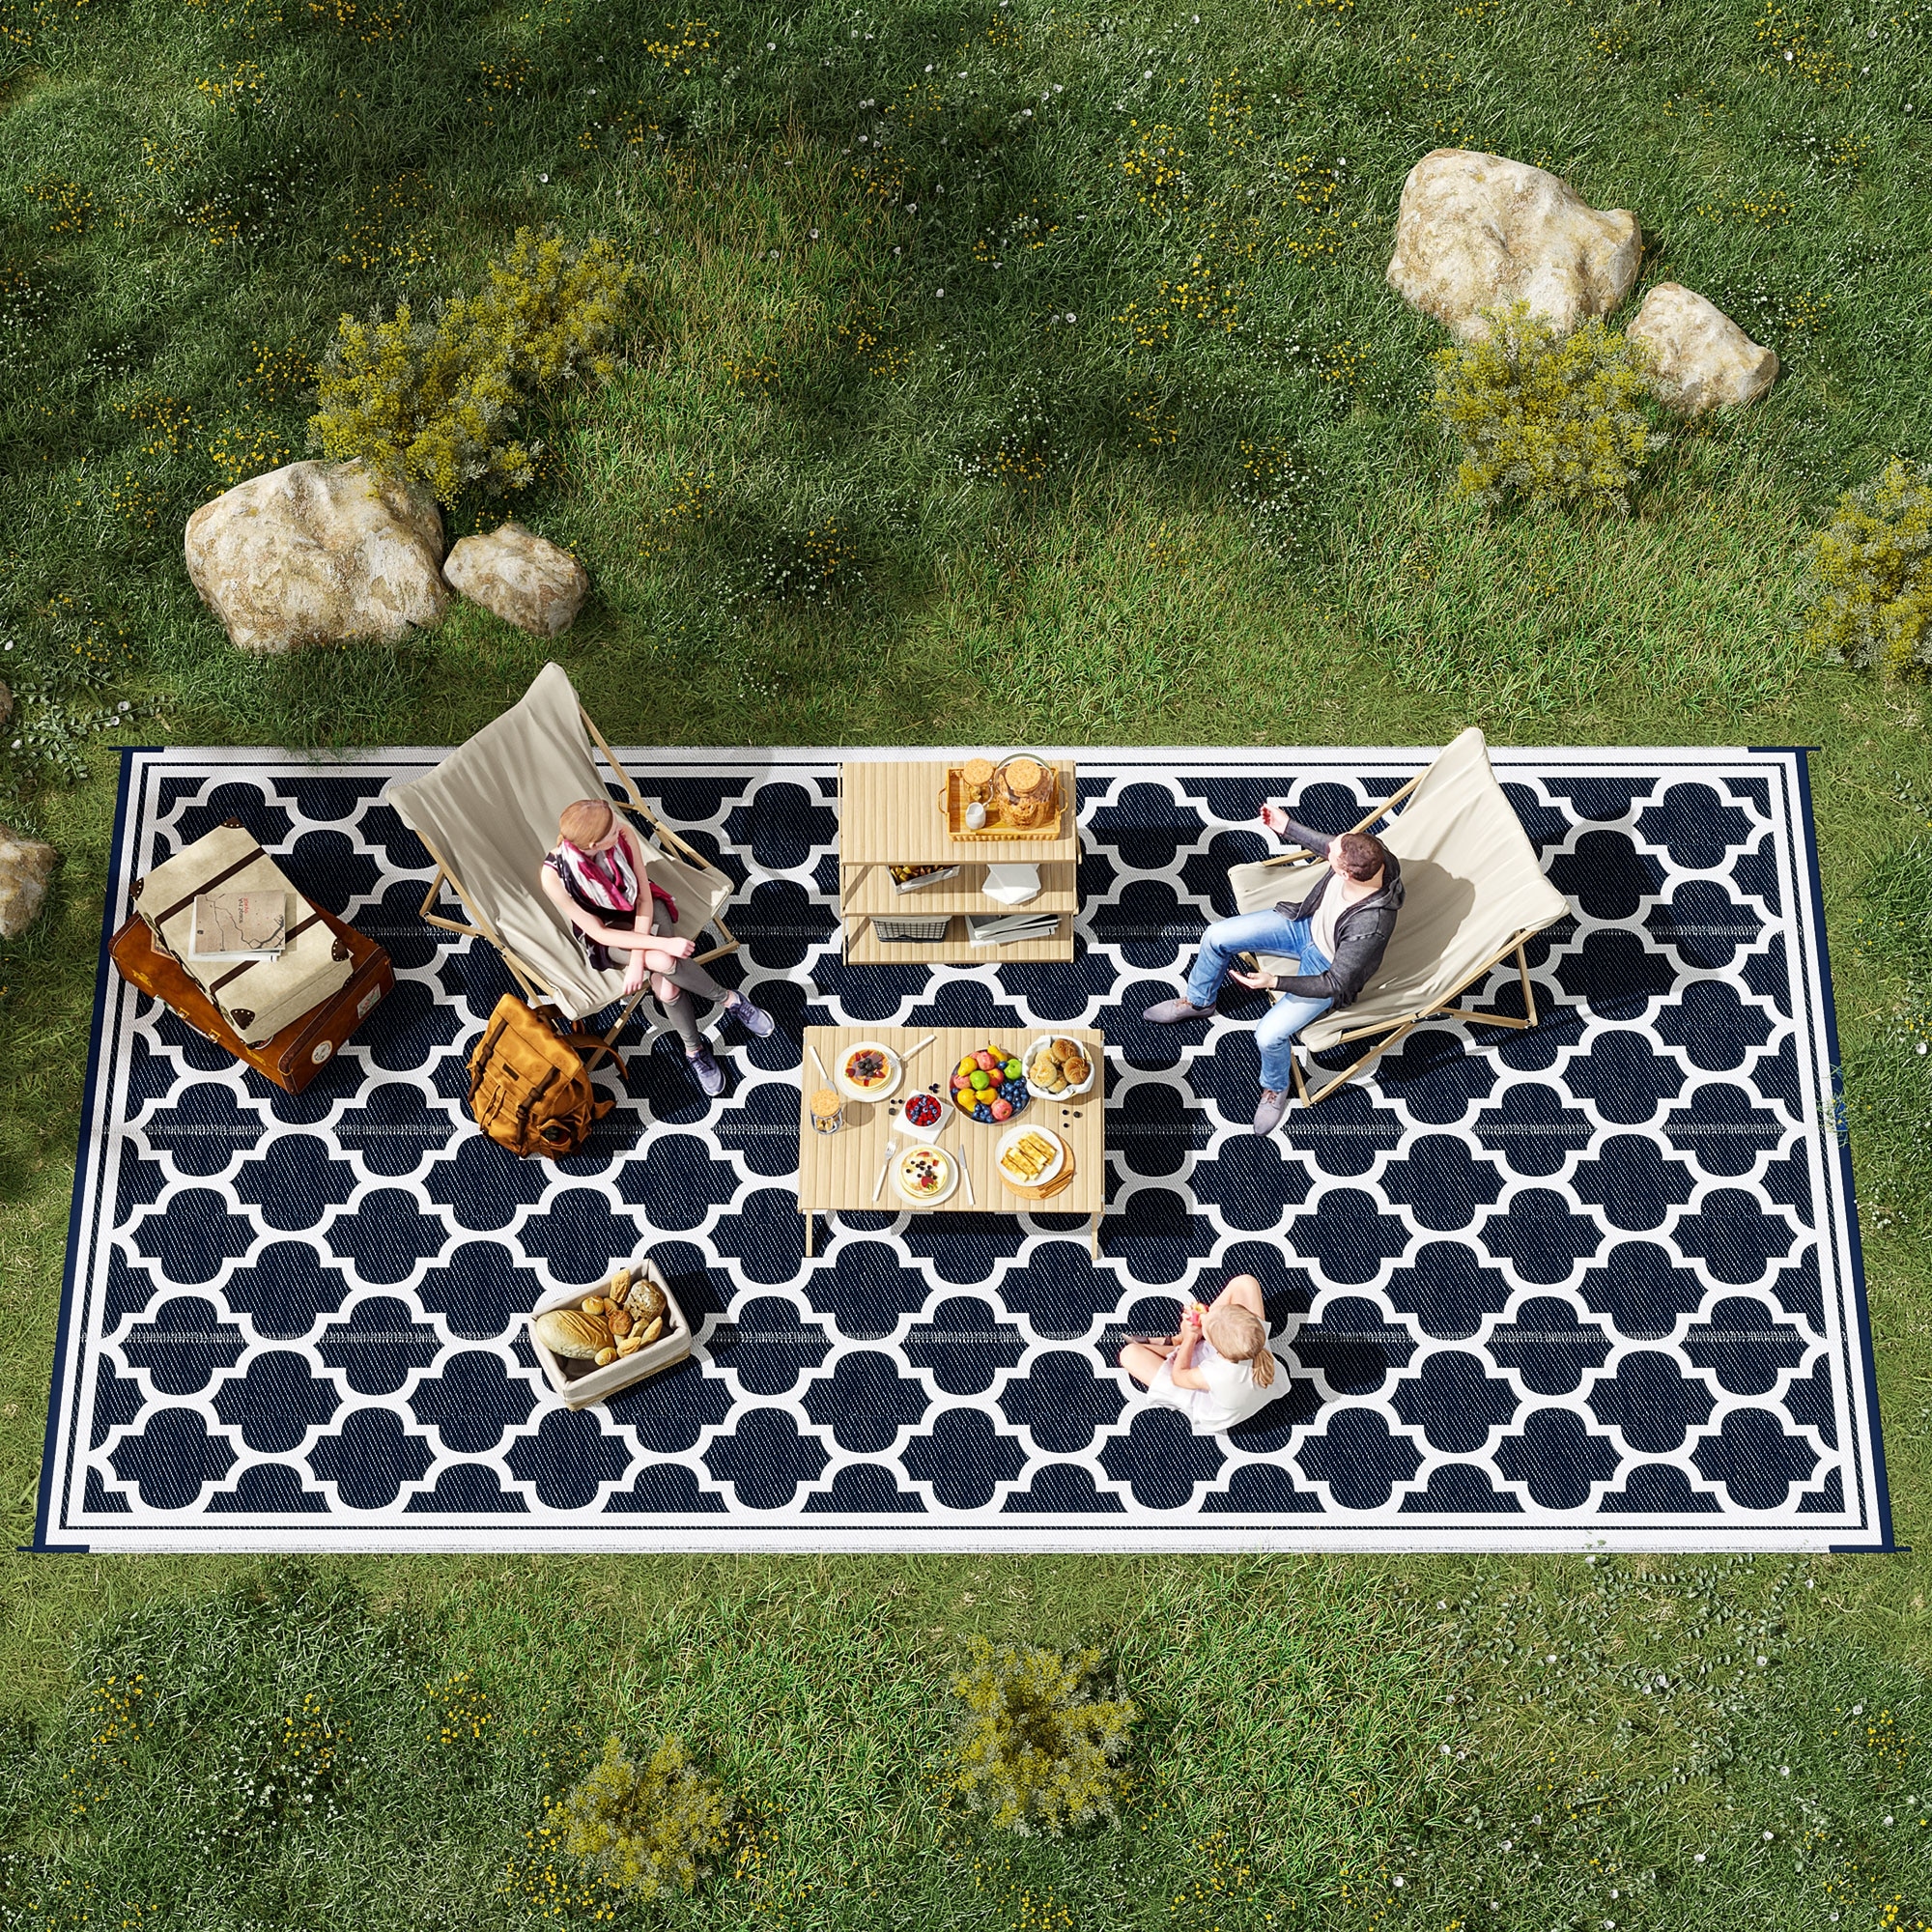 https://ak1.ostkcdn.com/images/products/is/images/direct/7479f859e2adfc4eed21ddd5a5957bd3e2f9916c/Outsunny-Reversible-Outdoor-RV-Rug%2C-Patio-Floor-Mat%2C-Plastic-Straw-Rug-for-Backyard%2C-Deck%2C-Picnic%2C-Beach%2C-Camping.jpg